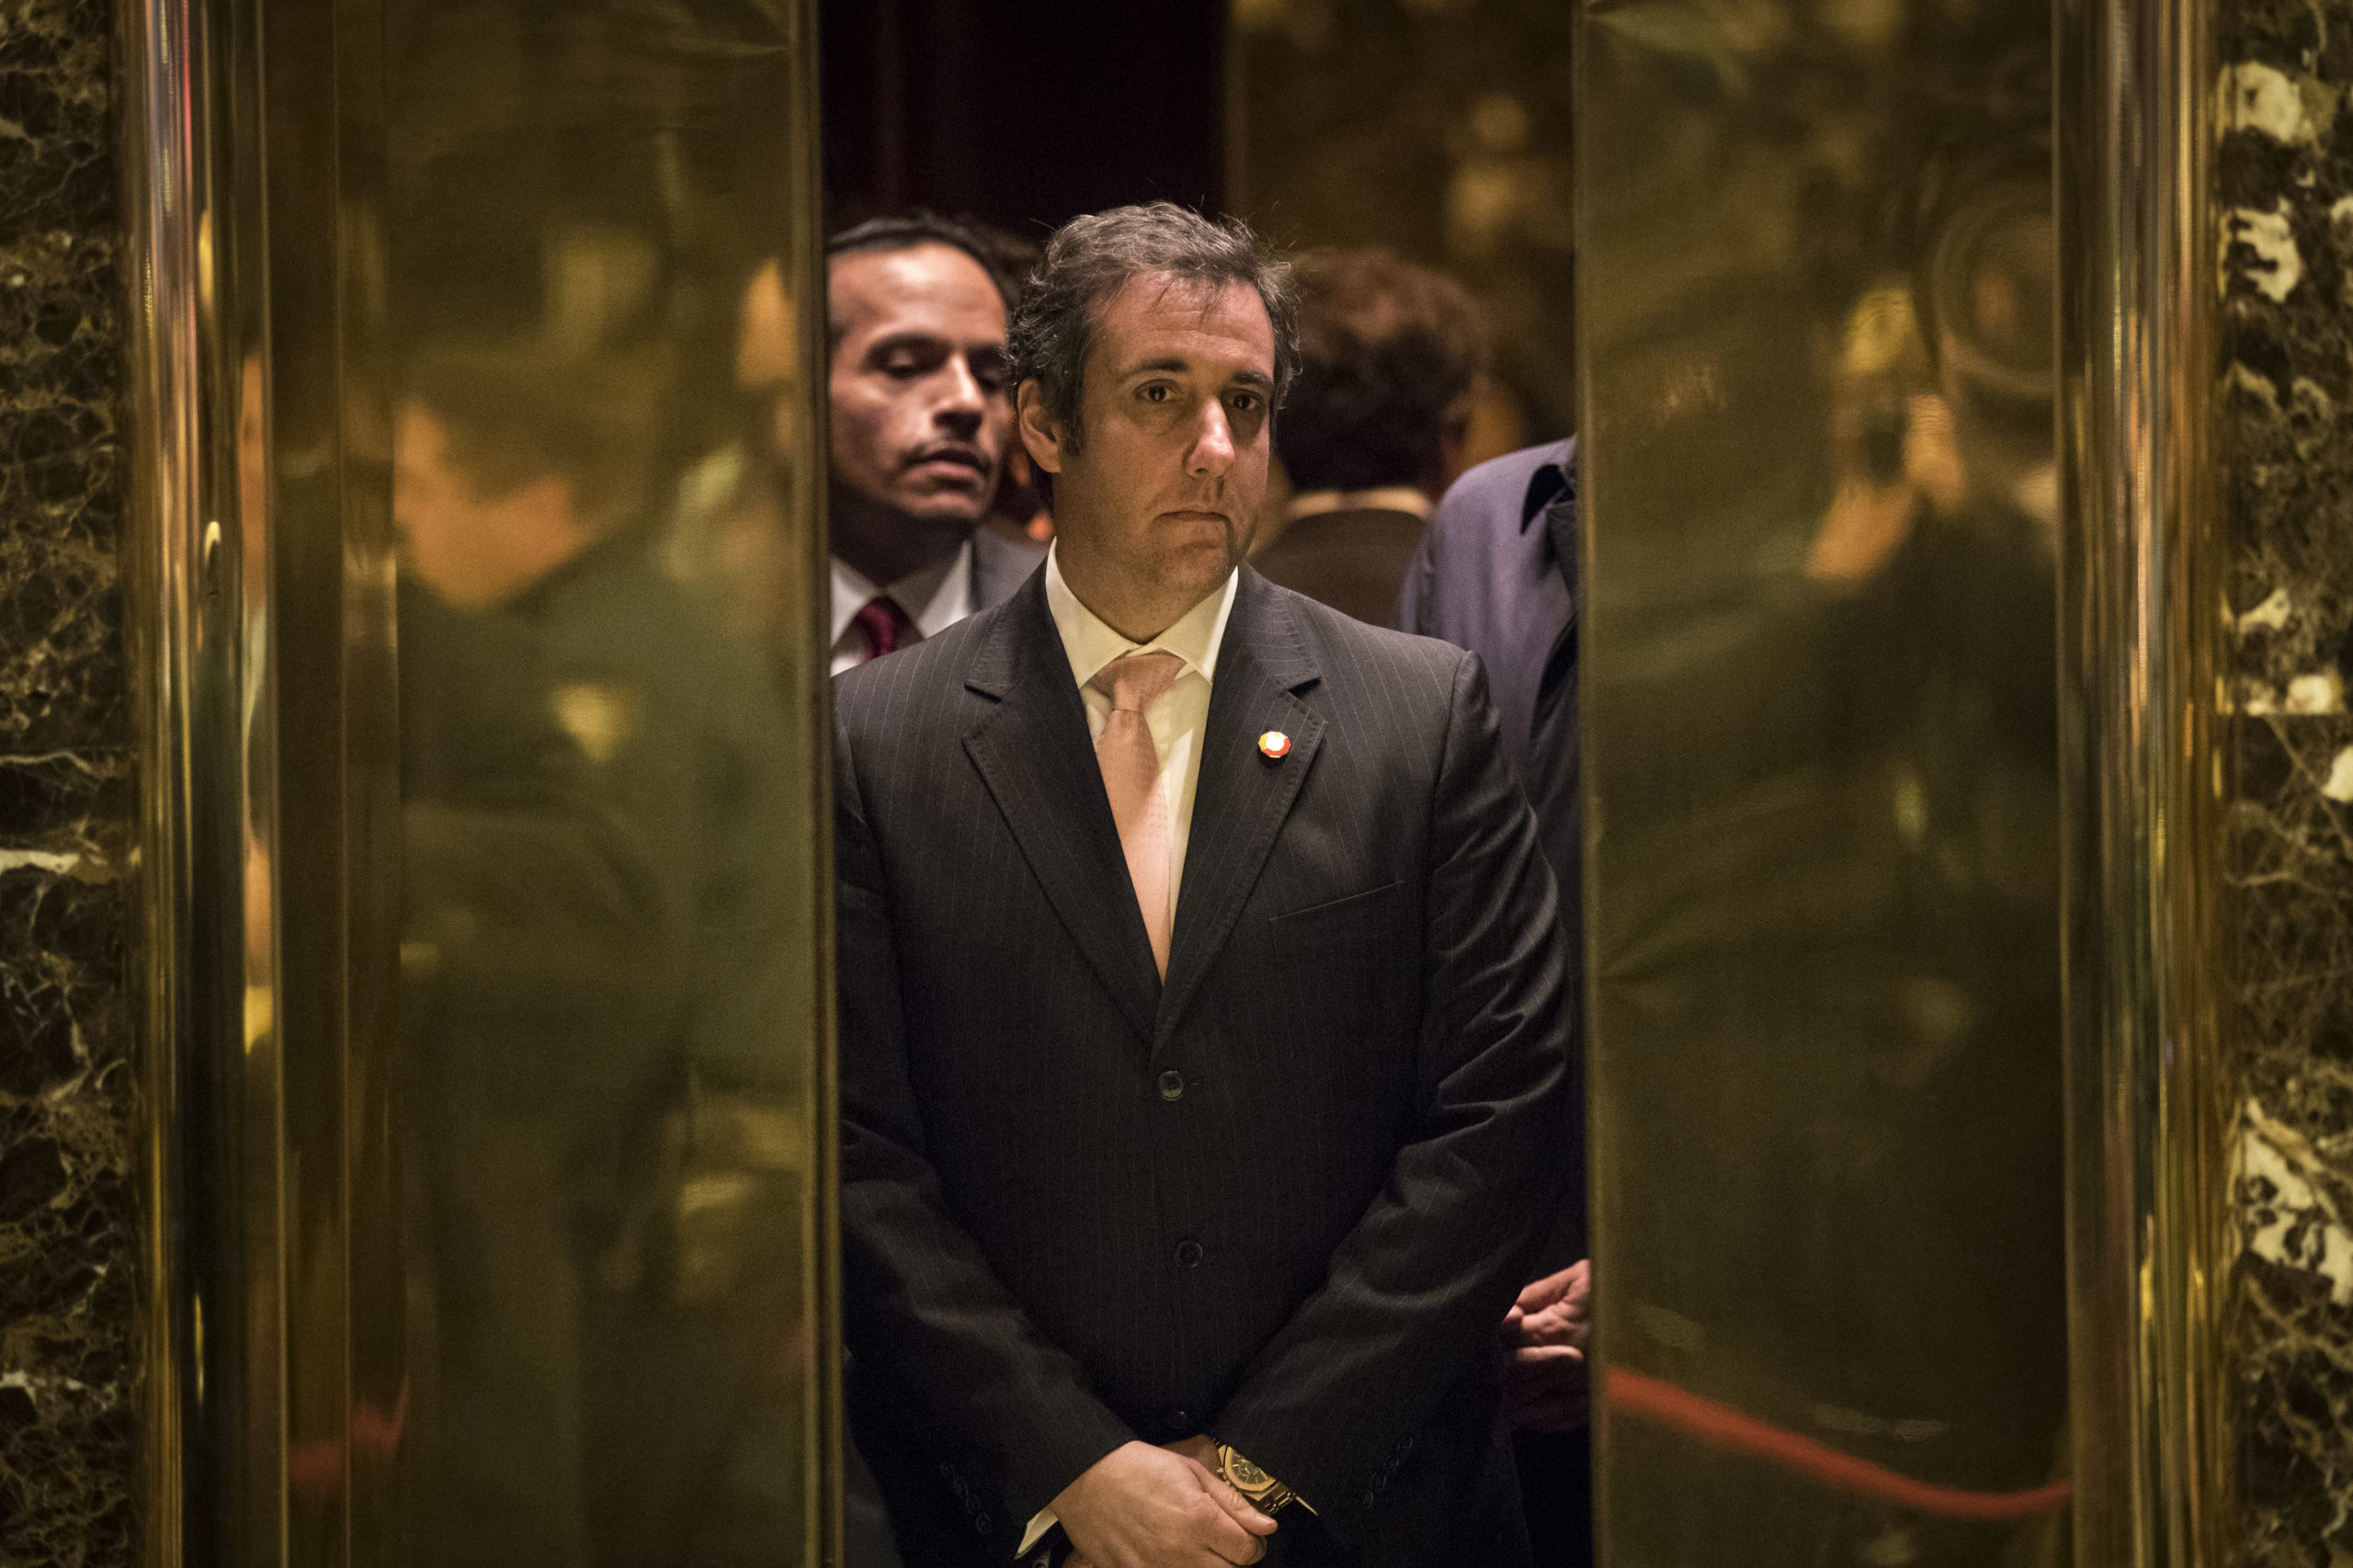 Former fixer to Donald Trump, Michael Cohen, made the allegations